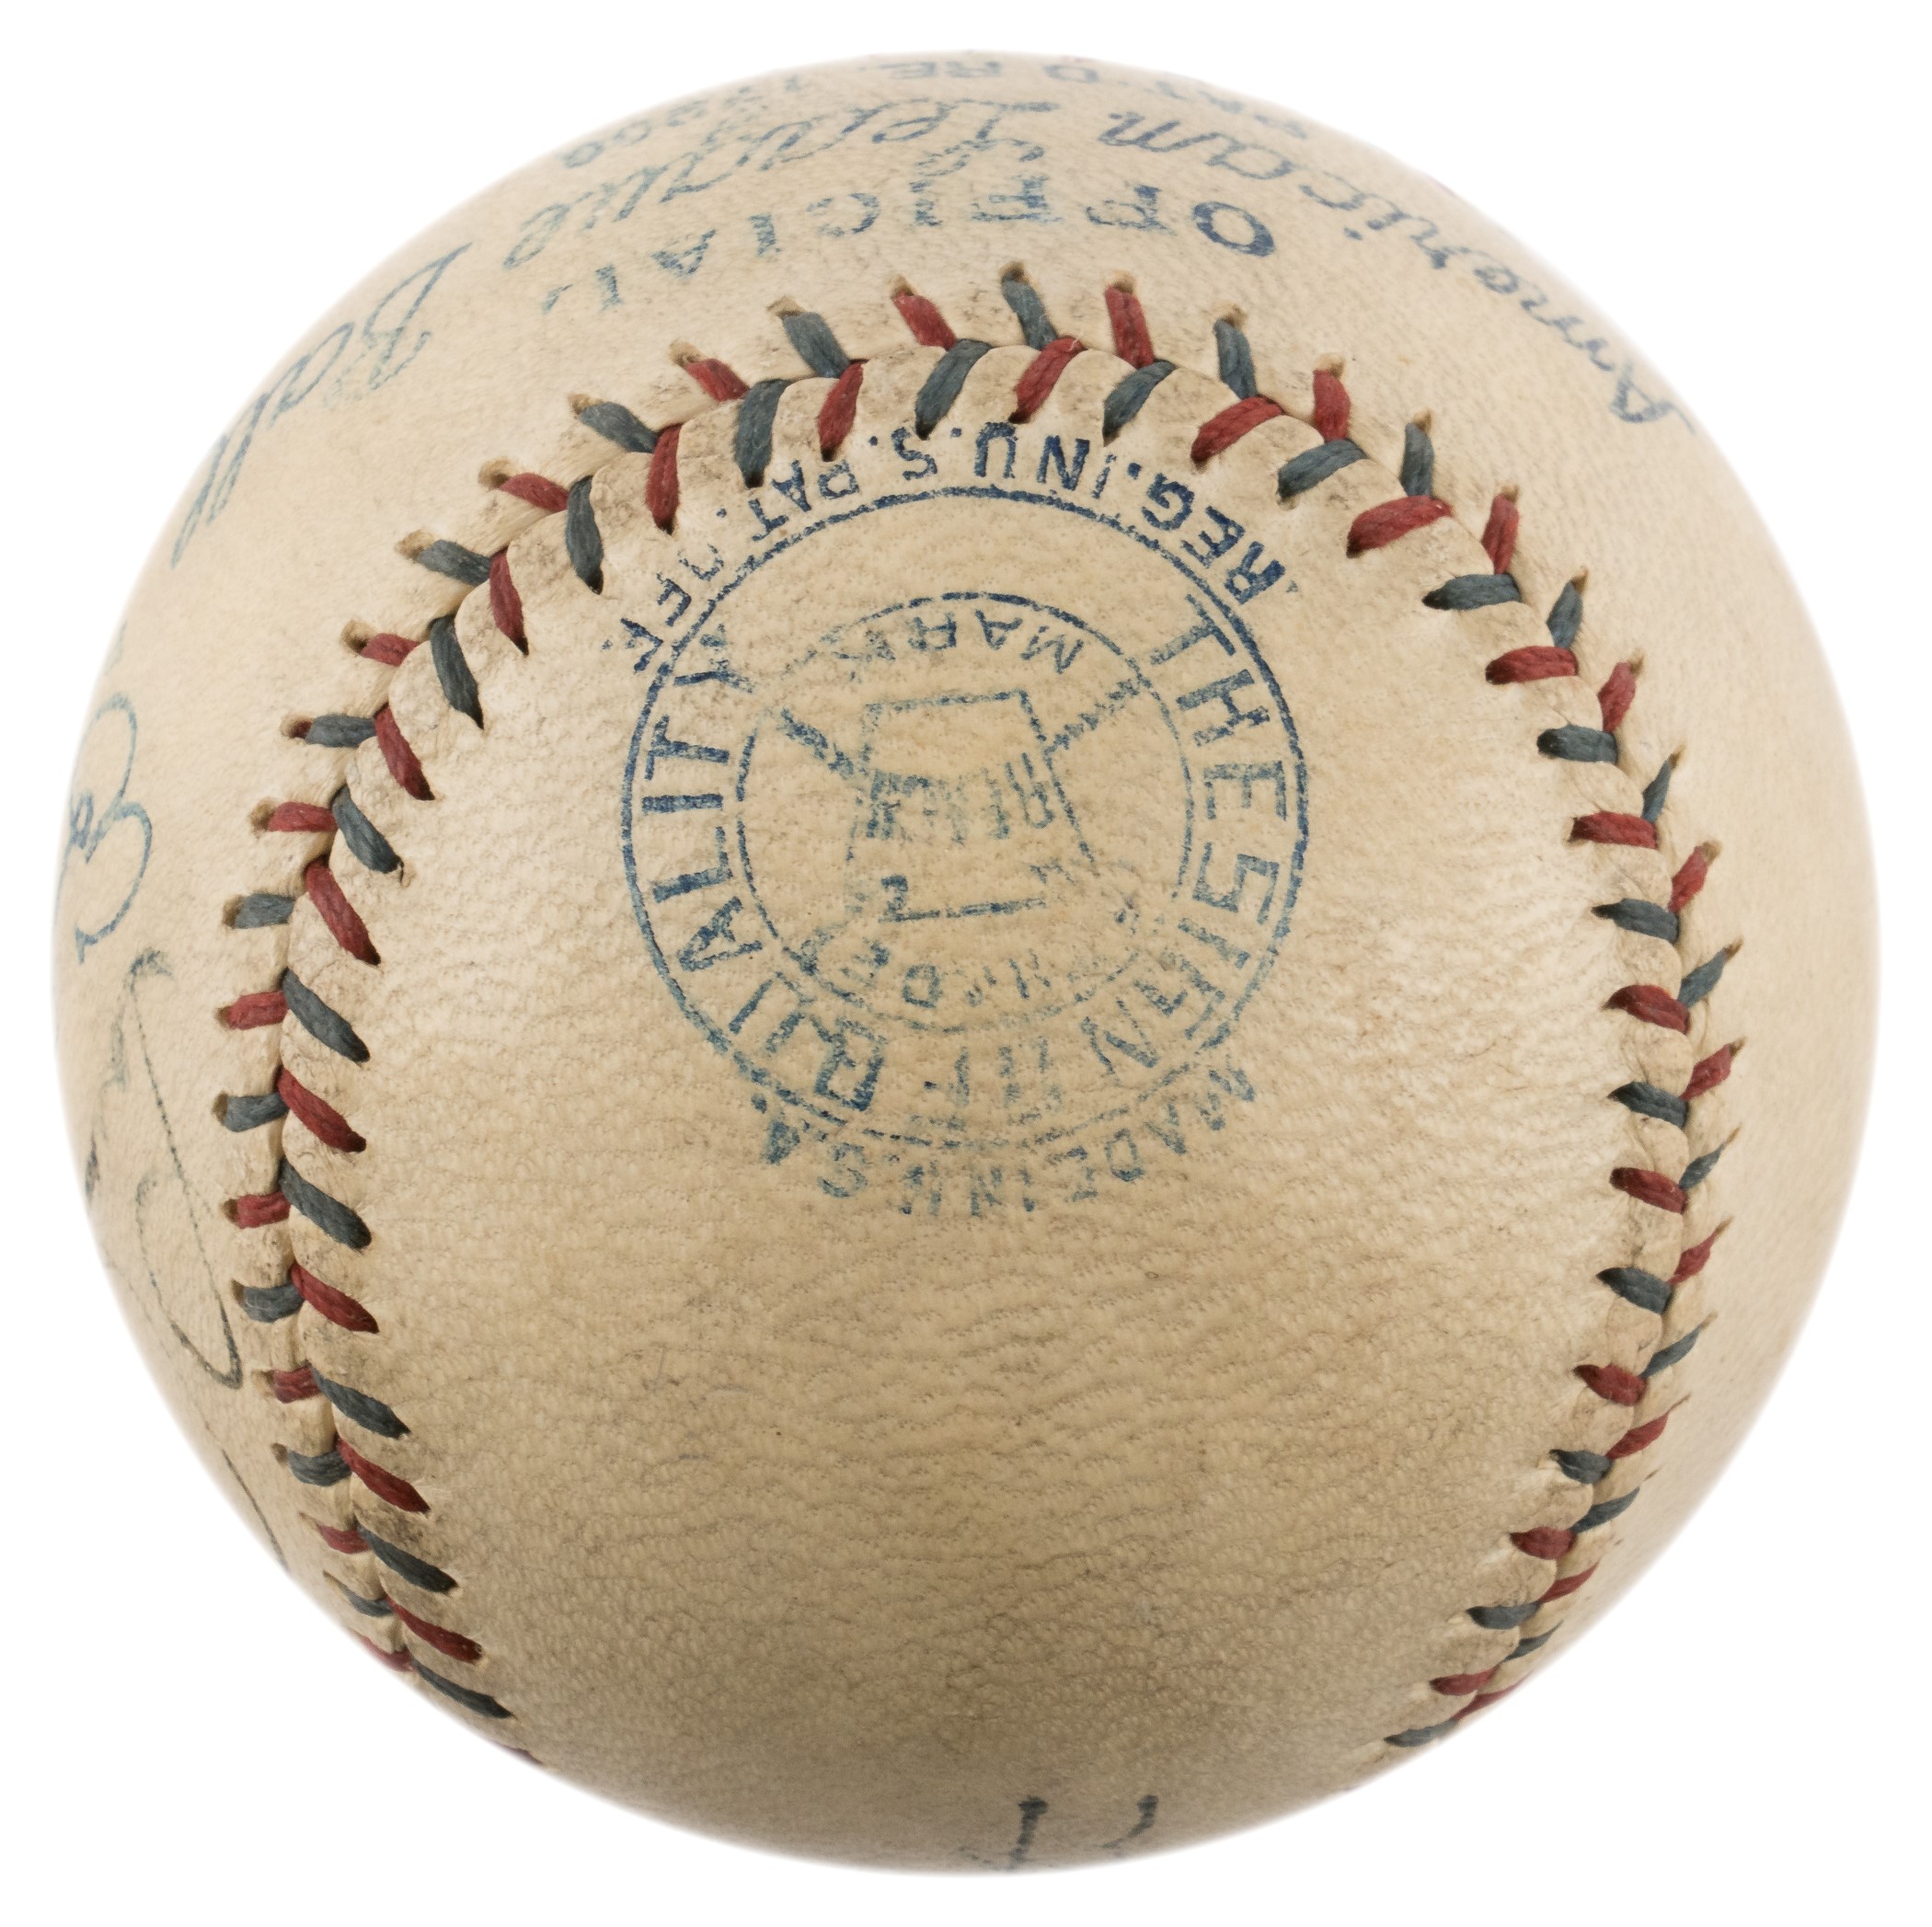 Babe Ruth signed baseball  Beckett Authentication Services